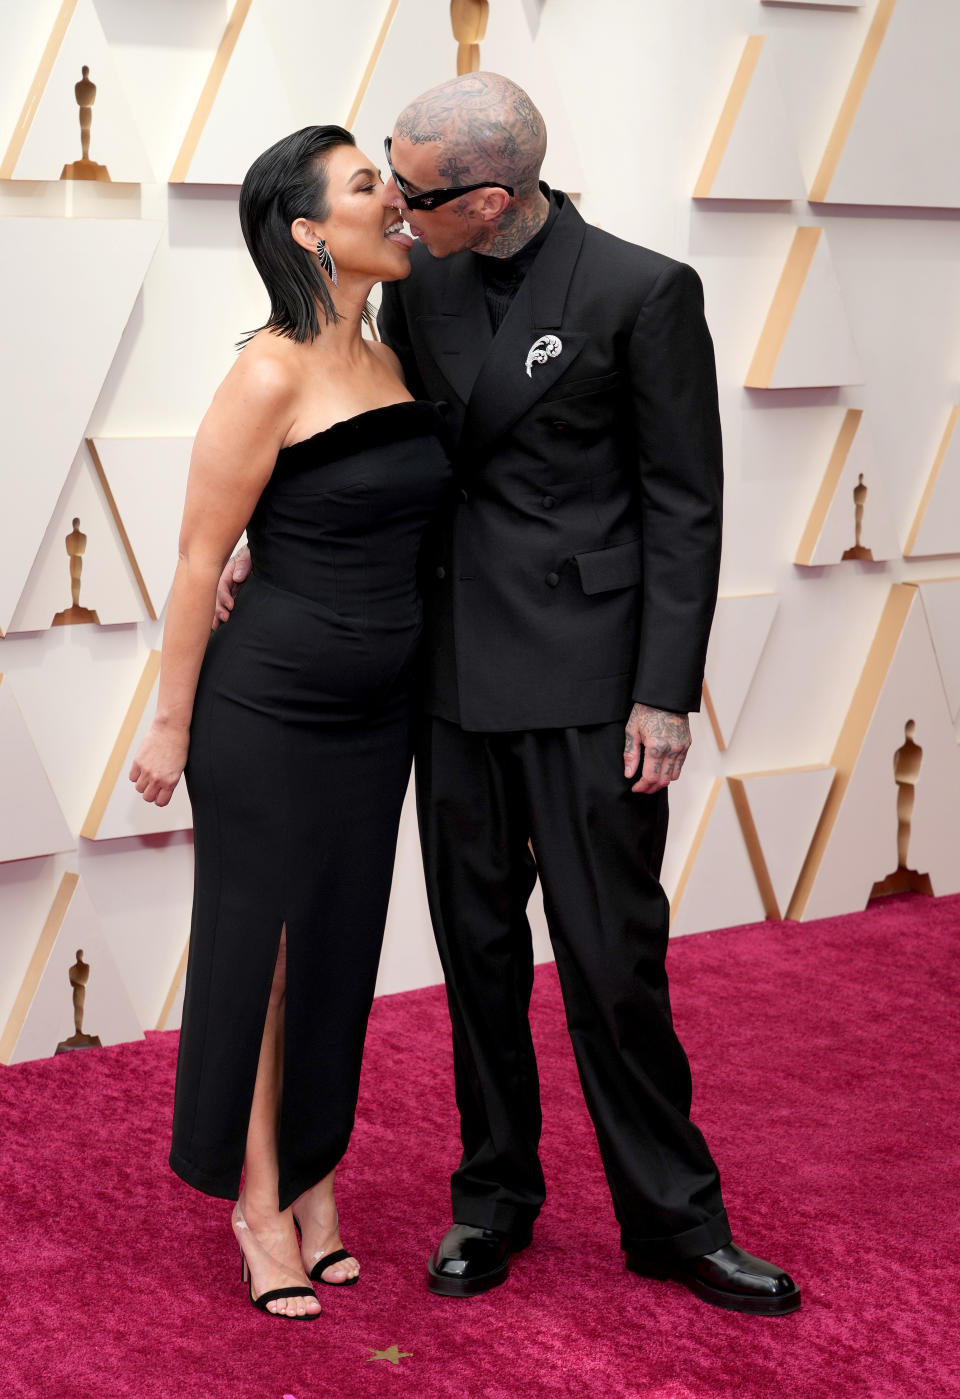 Kourtney Kardashian and Travis Barker attend the 94th Annual Academy Awards at Hollywood and Highland on March 27, 2022 in Hollywood, California. (WireImage/Getty Images))